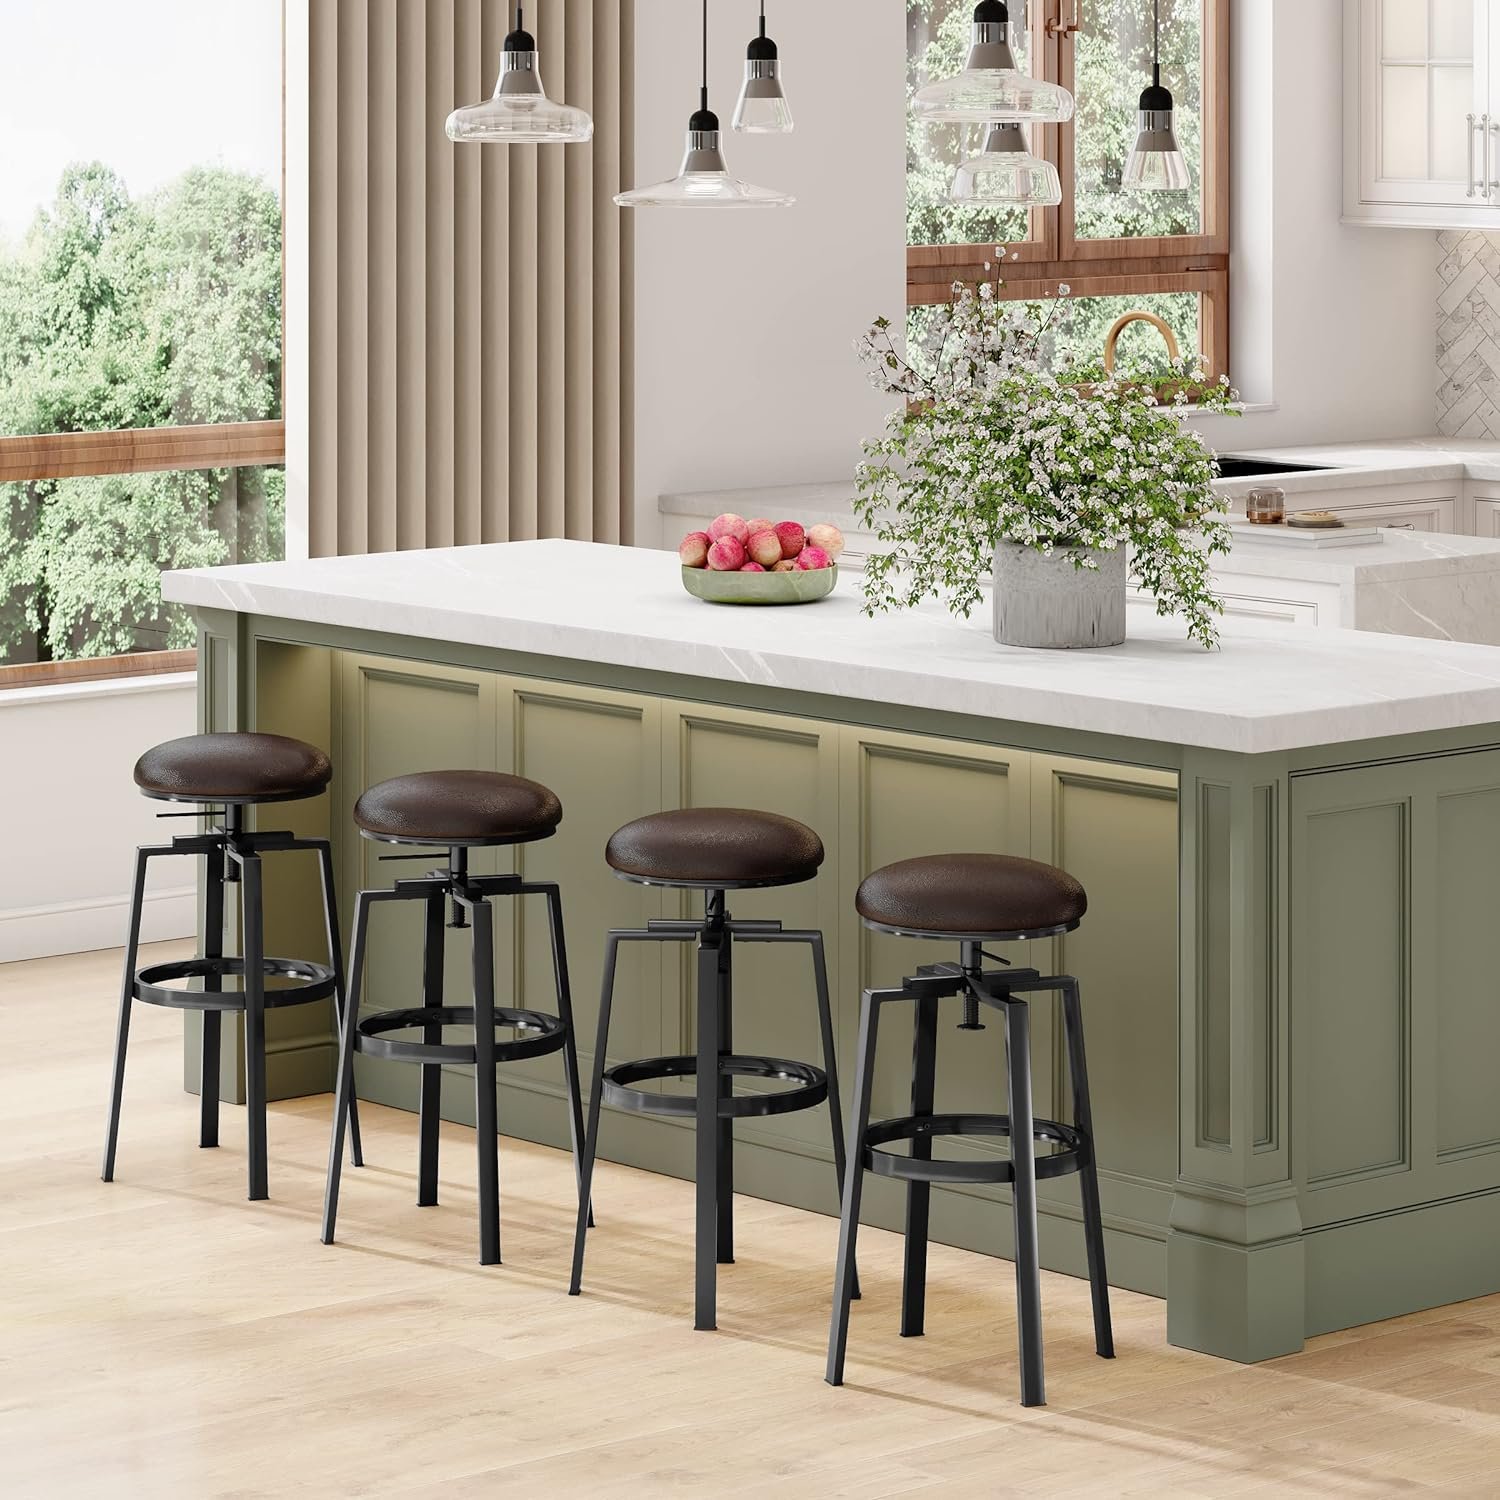 Comfortable Leather Bar Stools for Your Kitchen Island